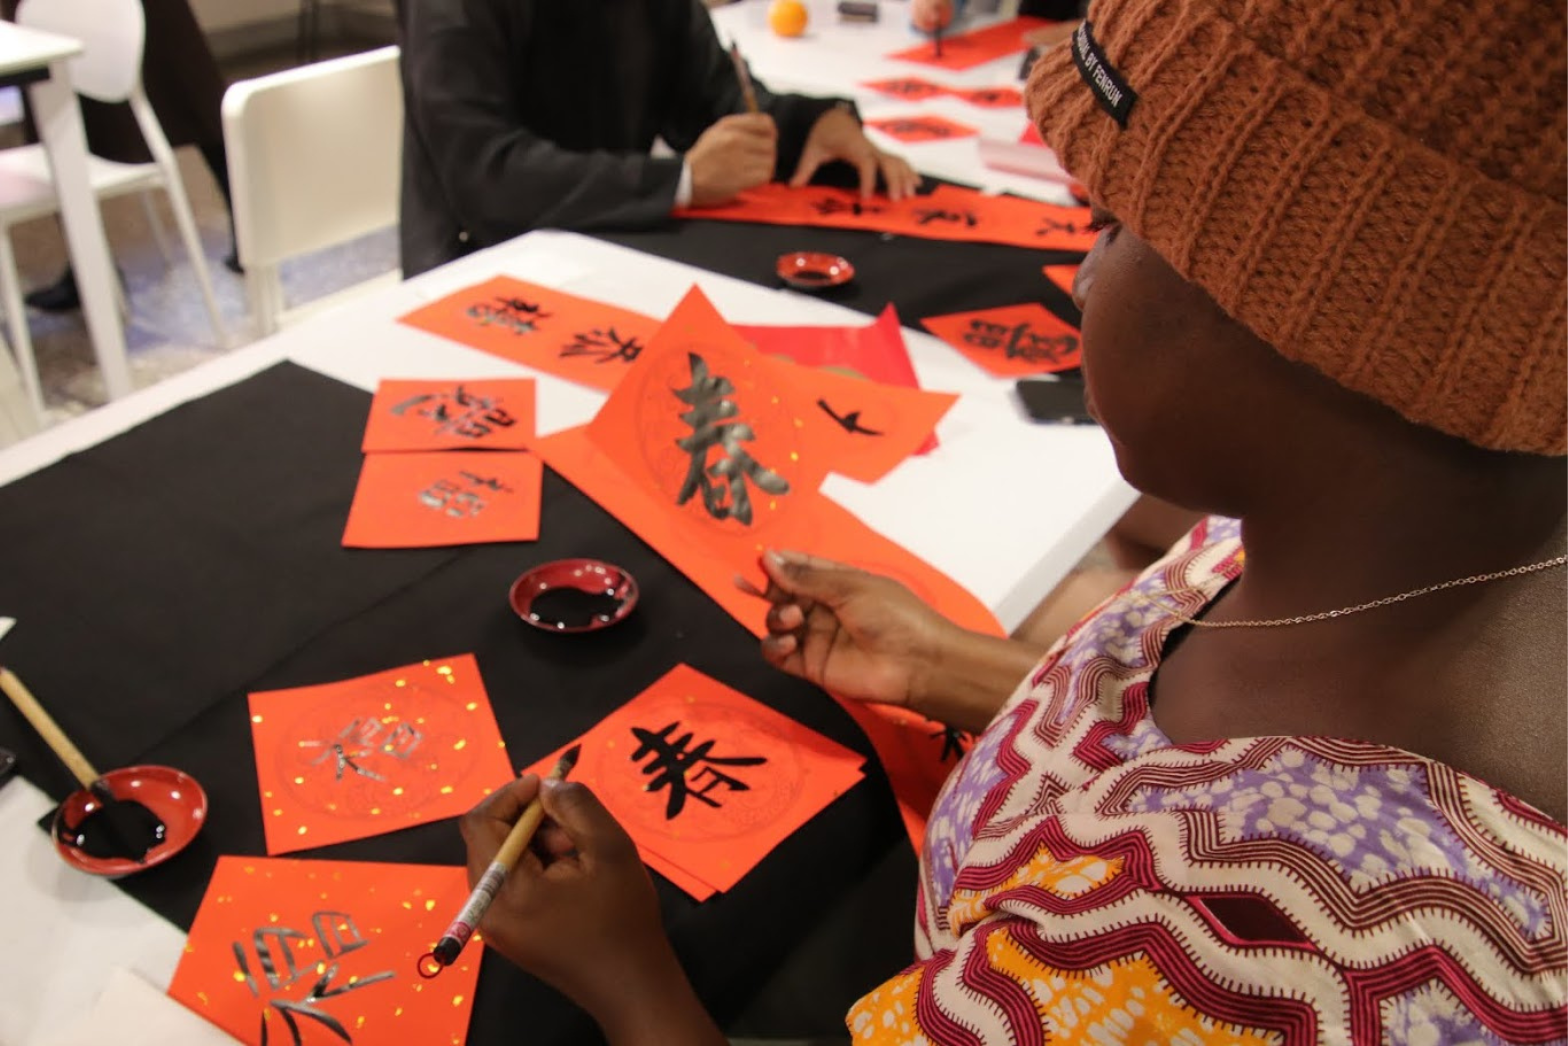 Students immersed themselves in the art of traditional calligraphy through writing spring couplets. Photo by Tsai Pei-lun